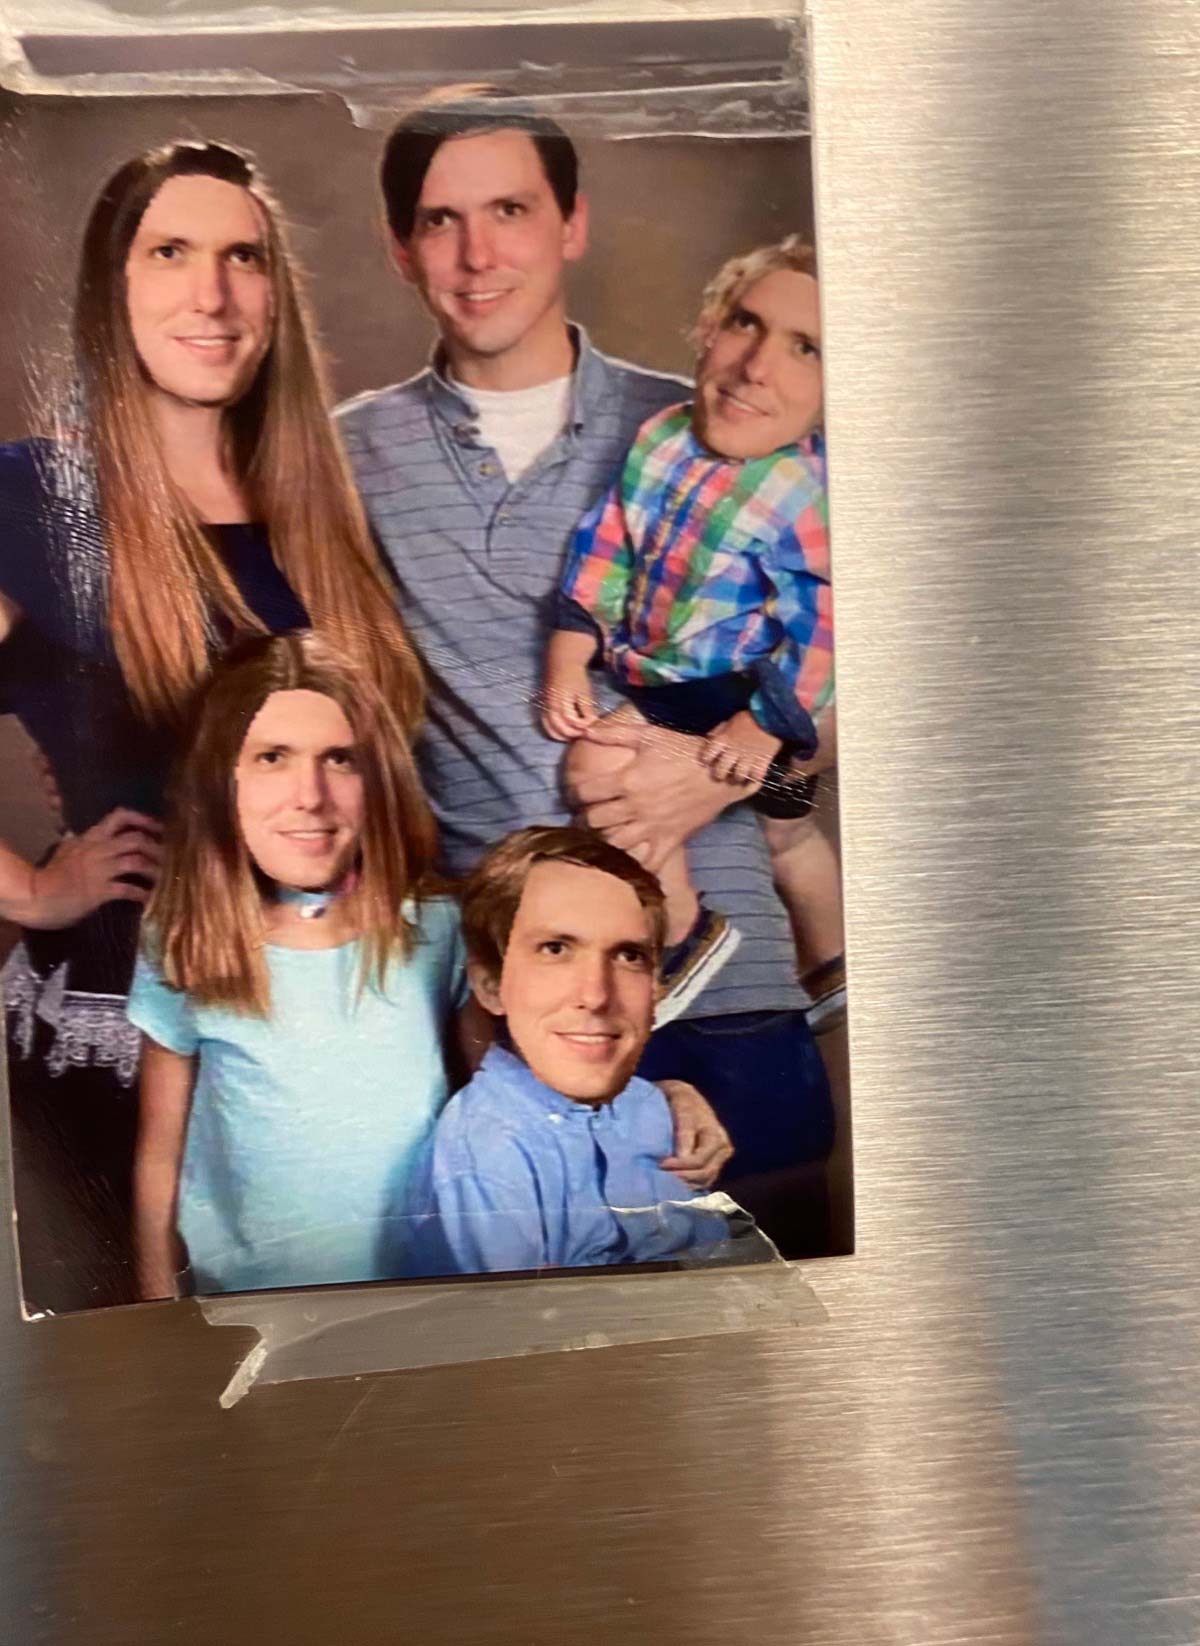 Every year me and my coworker always troll each other. This year I printed wallet sized family photos for the whole team